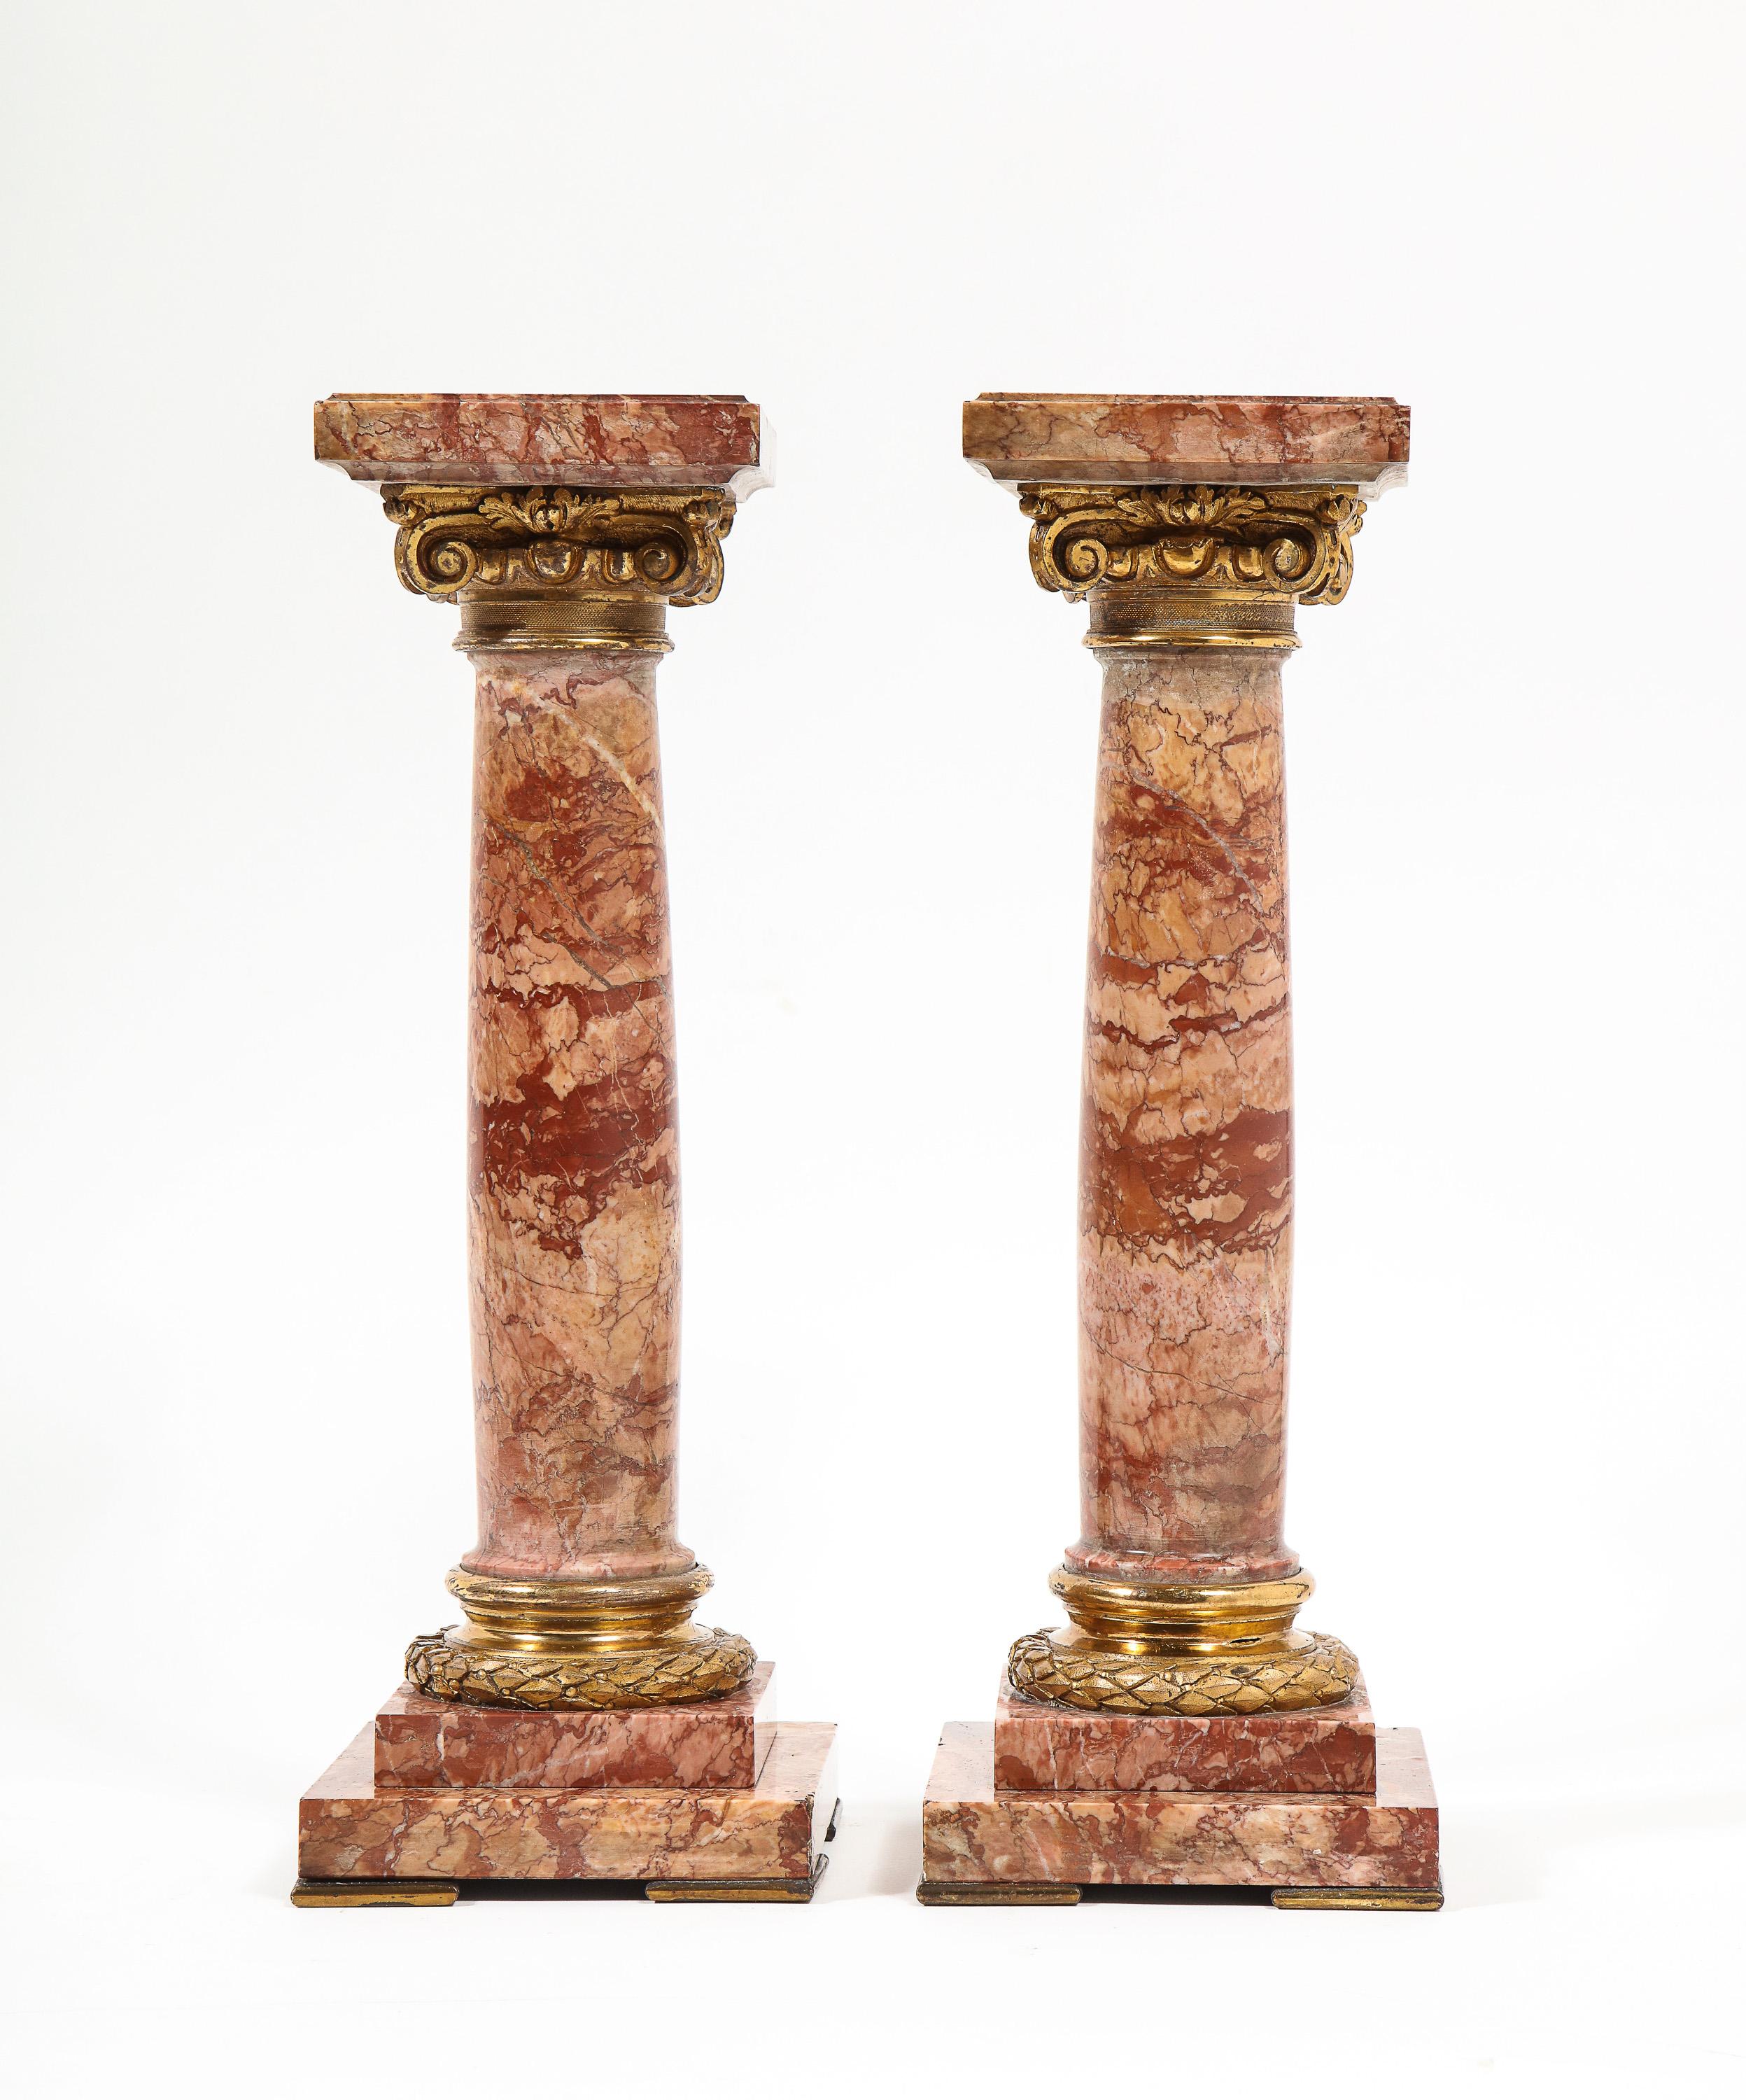 Pair of exquisite French ormolu mounted Jasper columns pedestals, circa 1870

Very fine jasper and French bronze / ormolu columns, and very decorative. Would look good in any room, especially on a console table.

Measures: 14